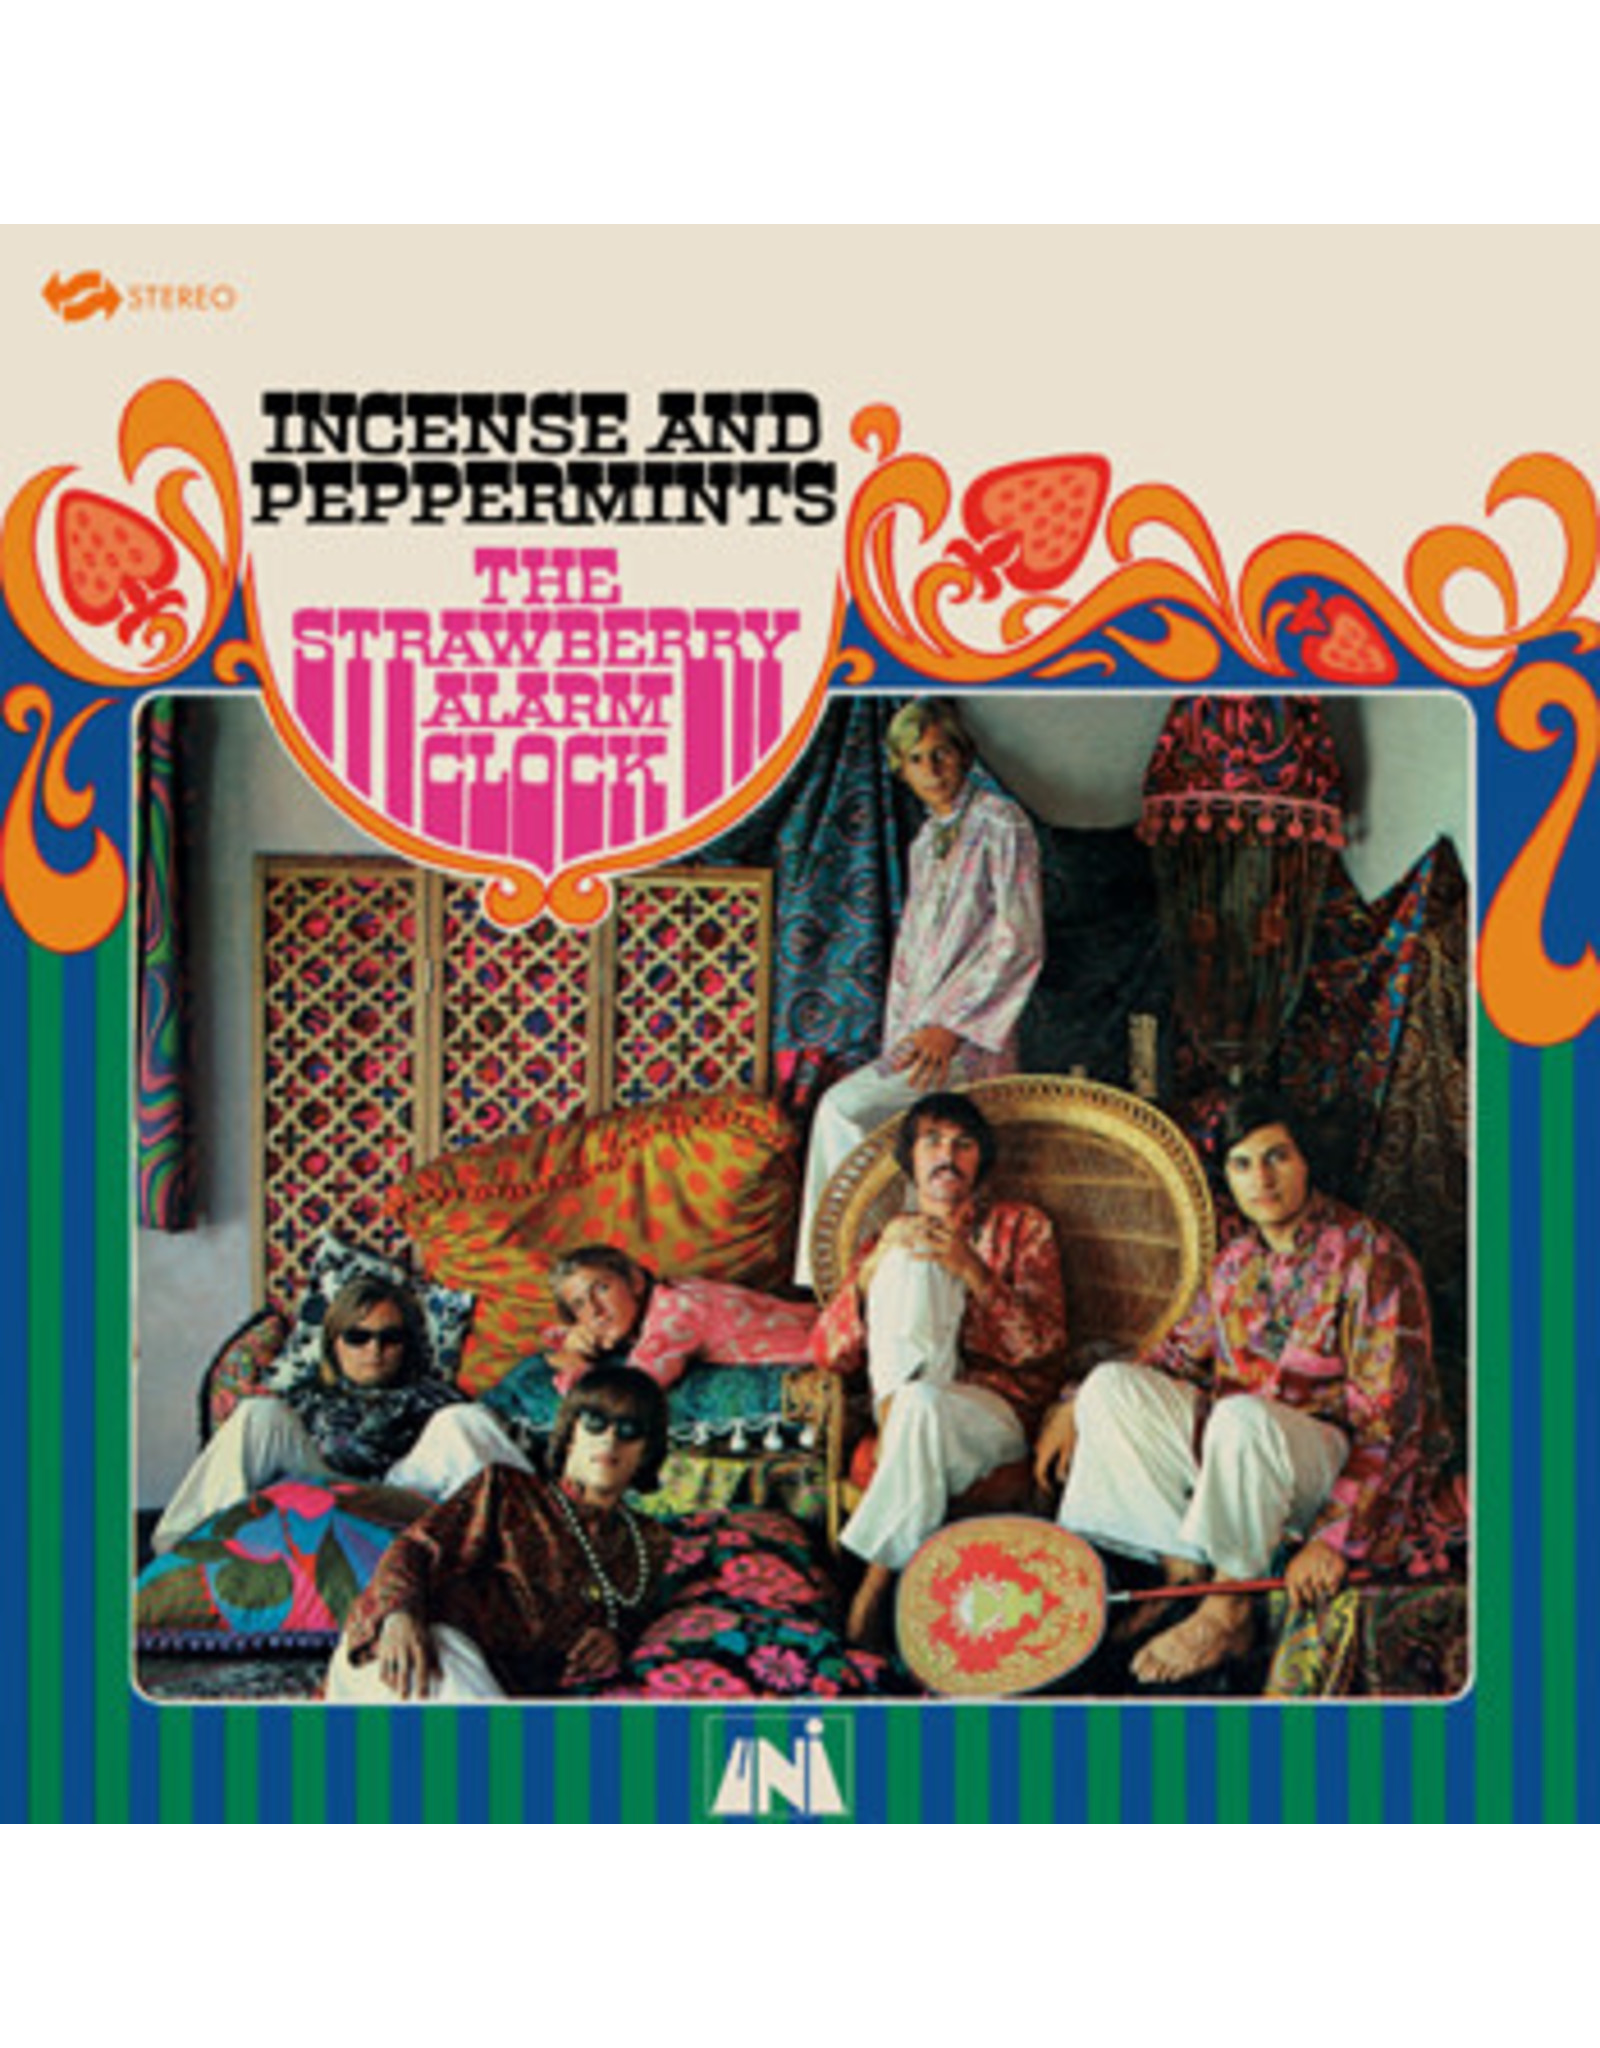 Strawberry Alarm Clock: 2023RSD - Incense And Peppermints LP